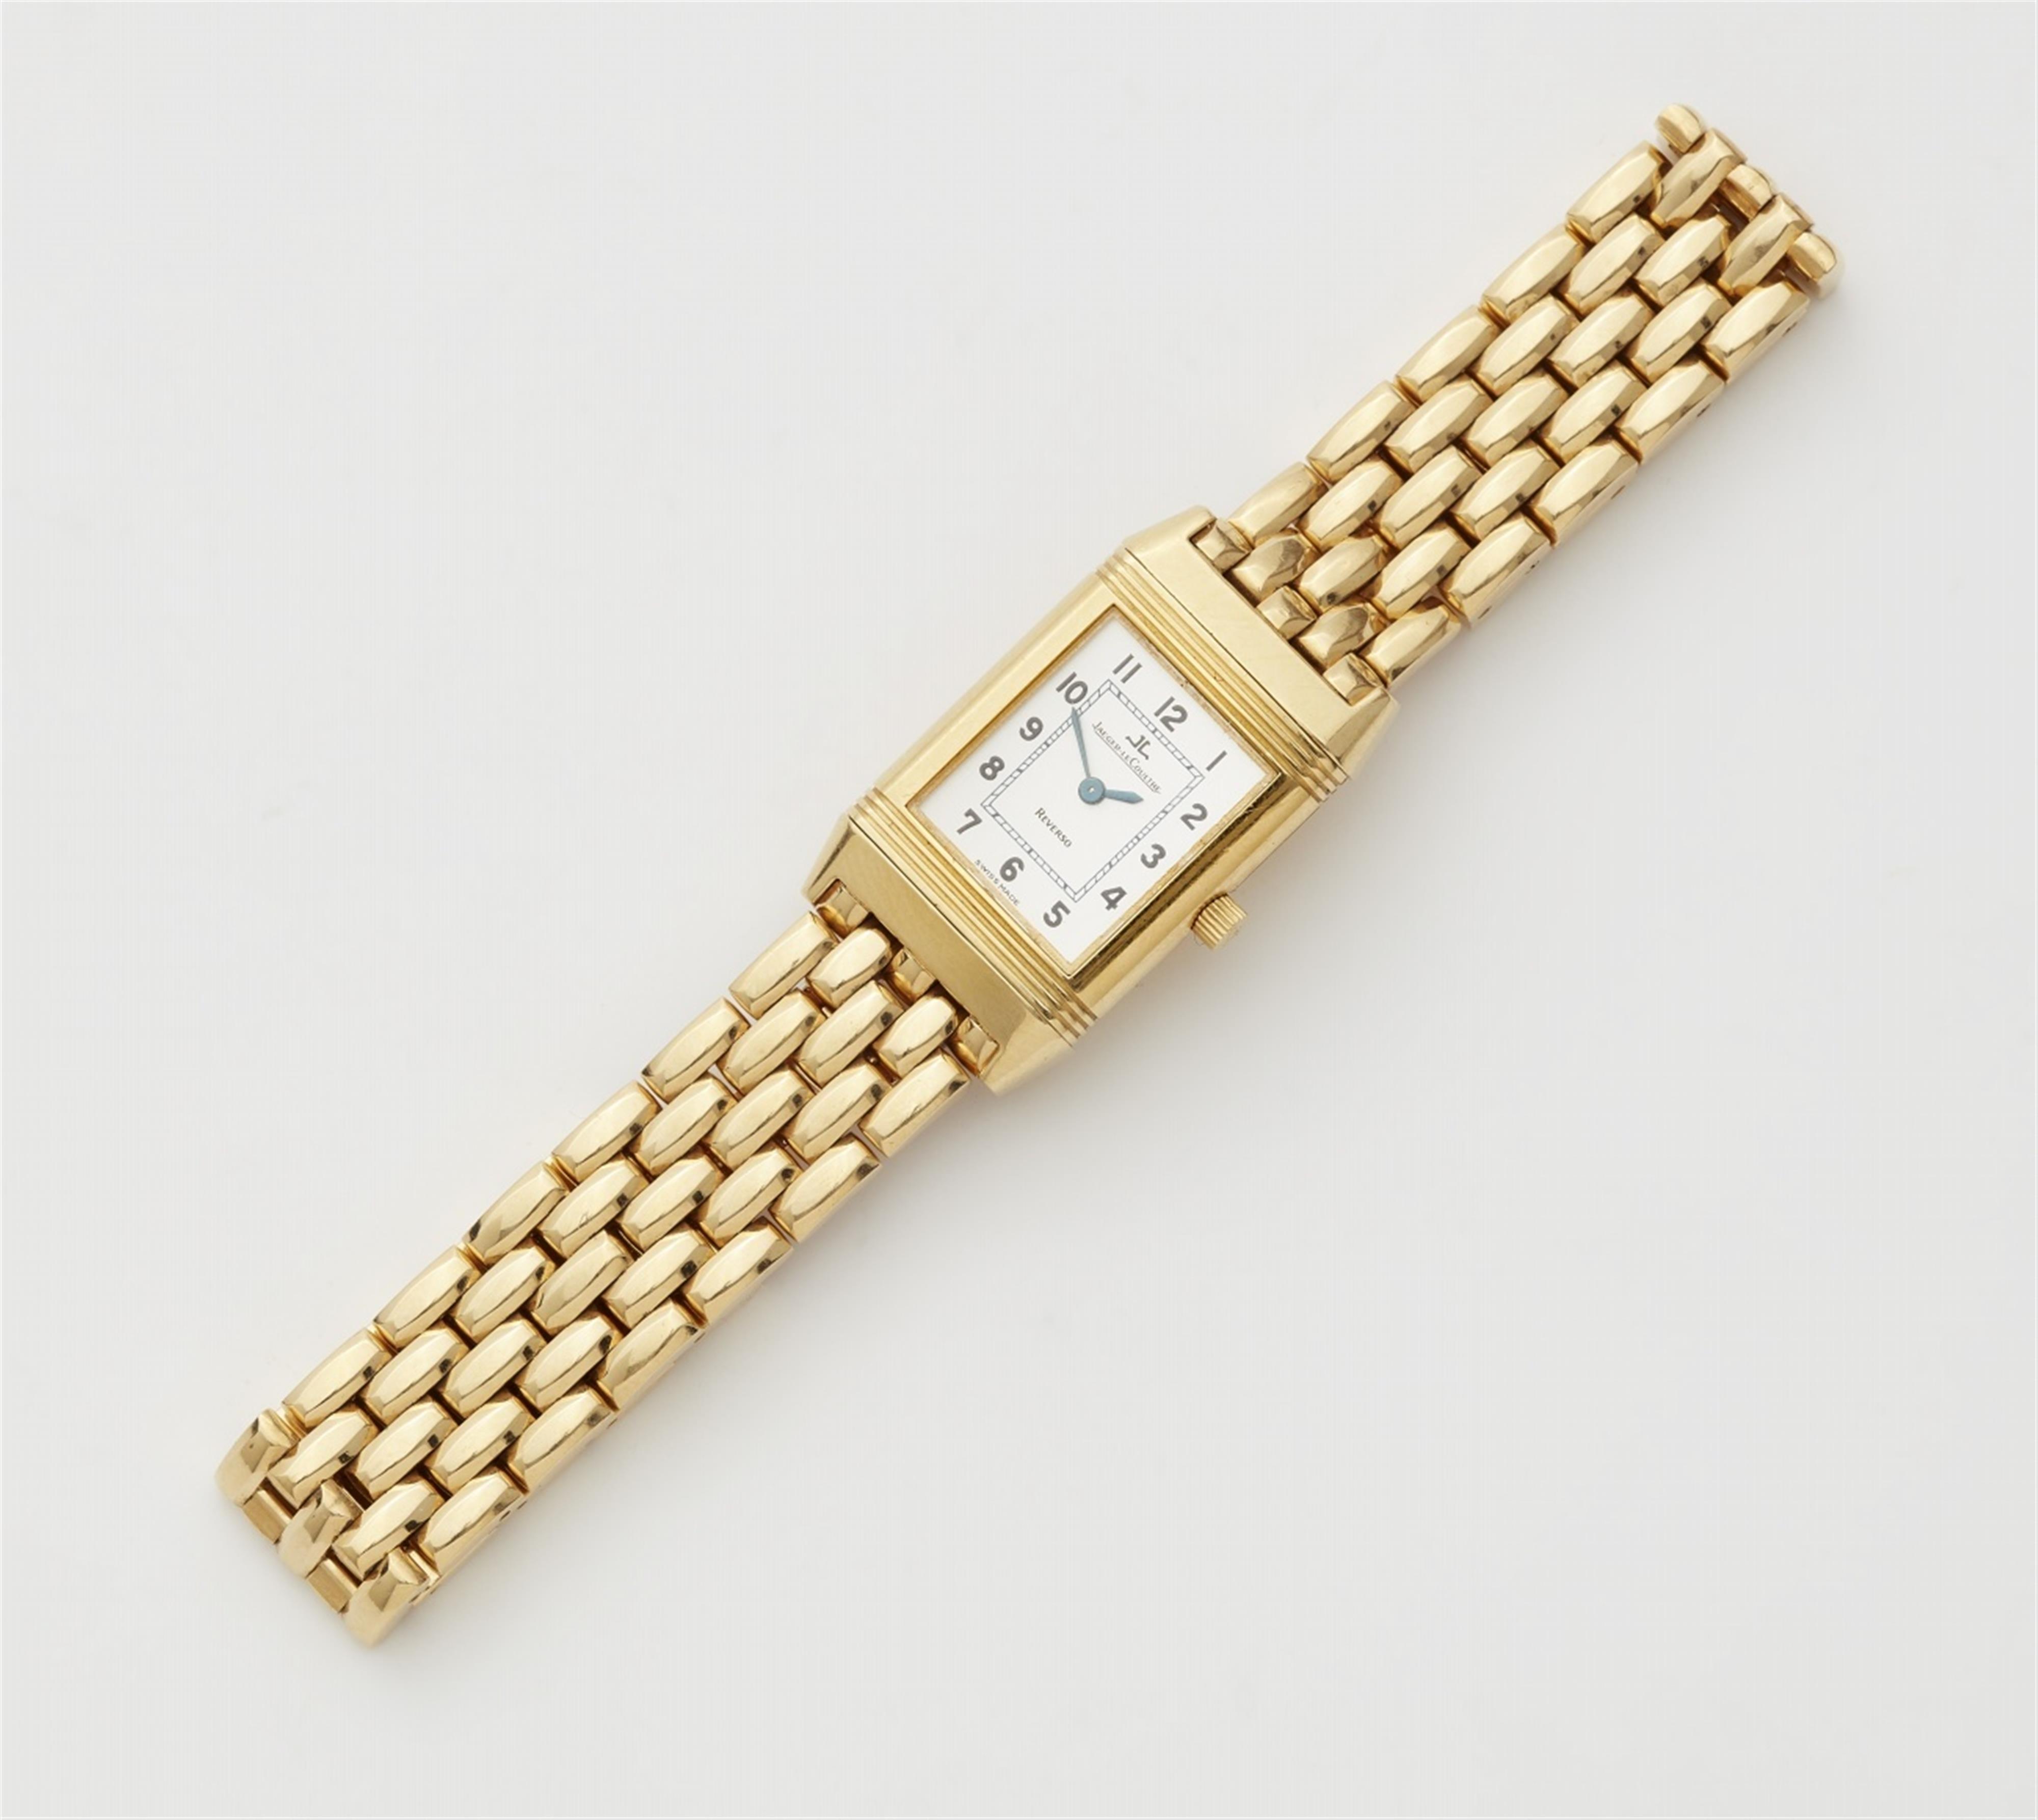 An 18k gold Reverso Lady Quartz wrist watch with box and papers - 